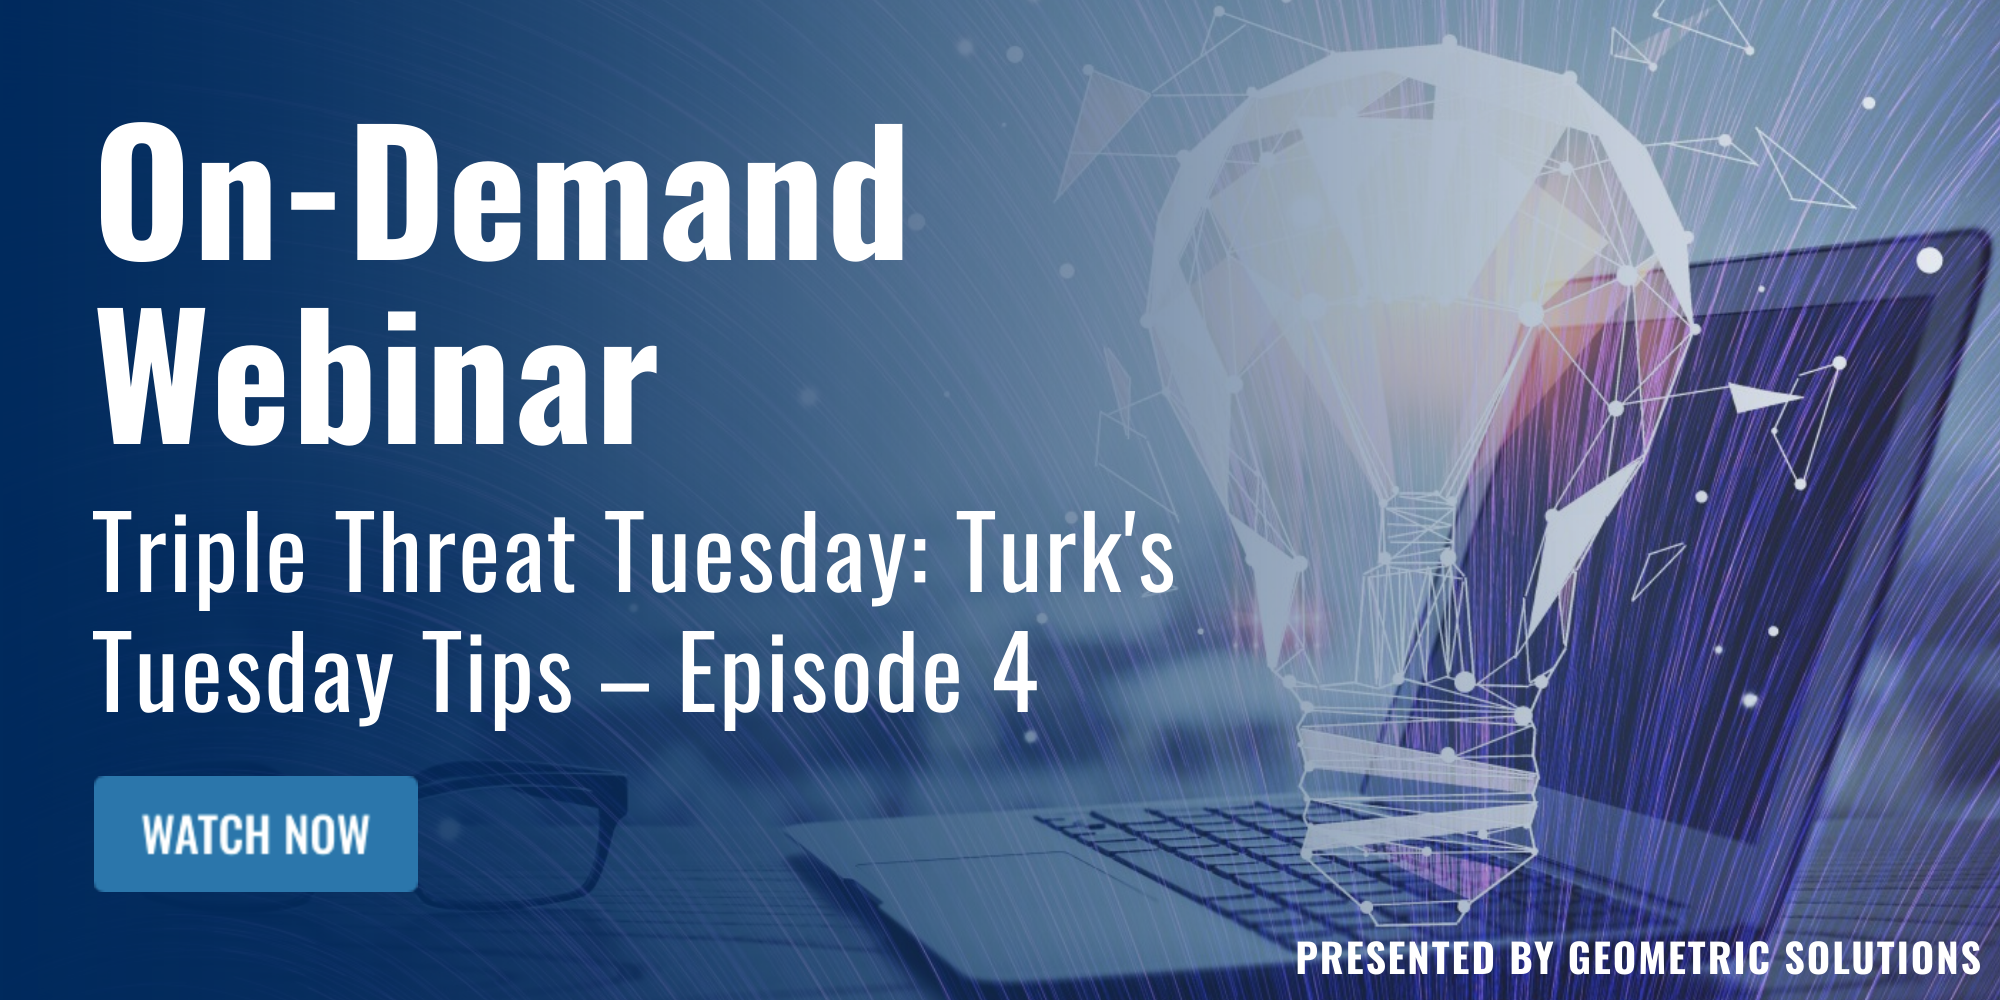 On-Demand Webinar: Triple Threat Tuesday: Turk's Tuesday Tips - Episode 4: Working with Large Assemblies